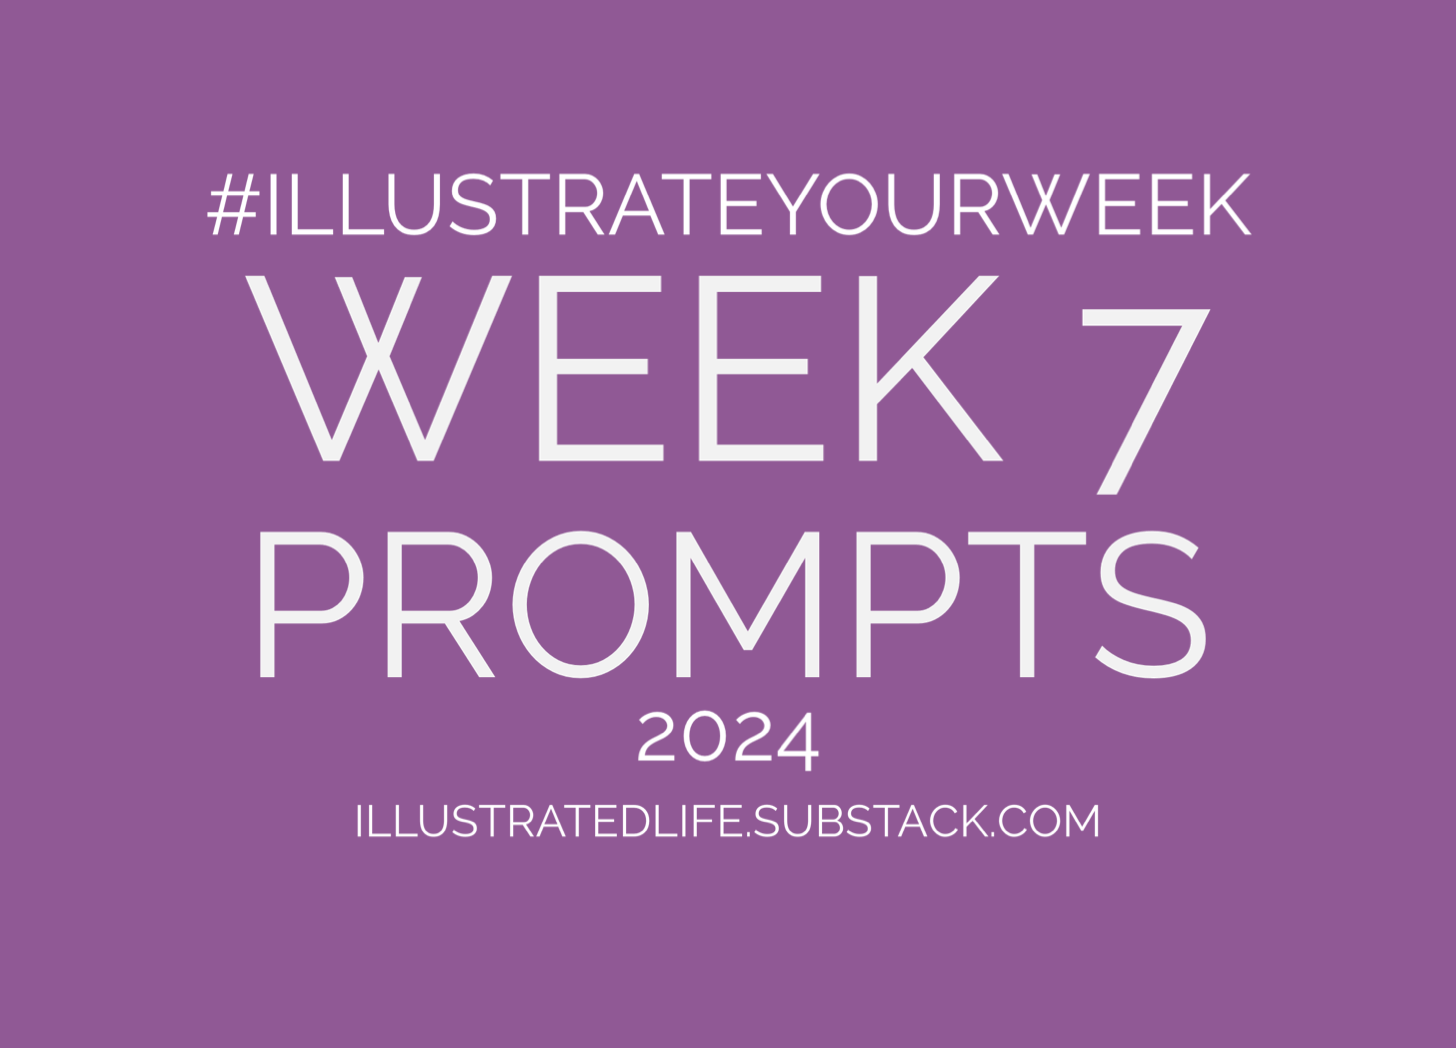 Illustrate Your Week Prompts for Week 7